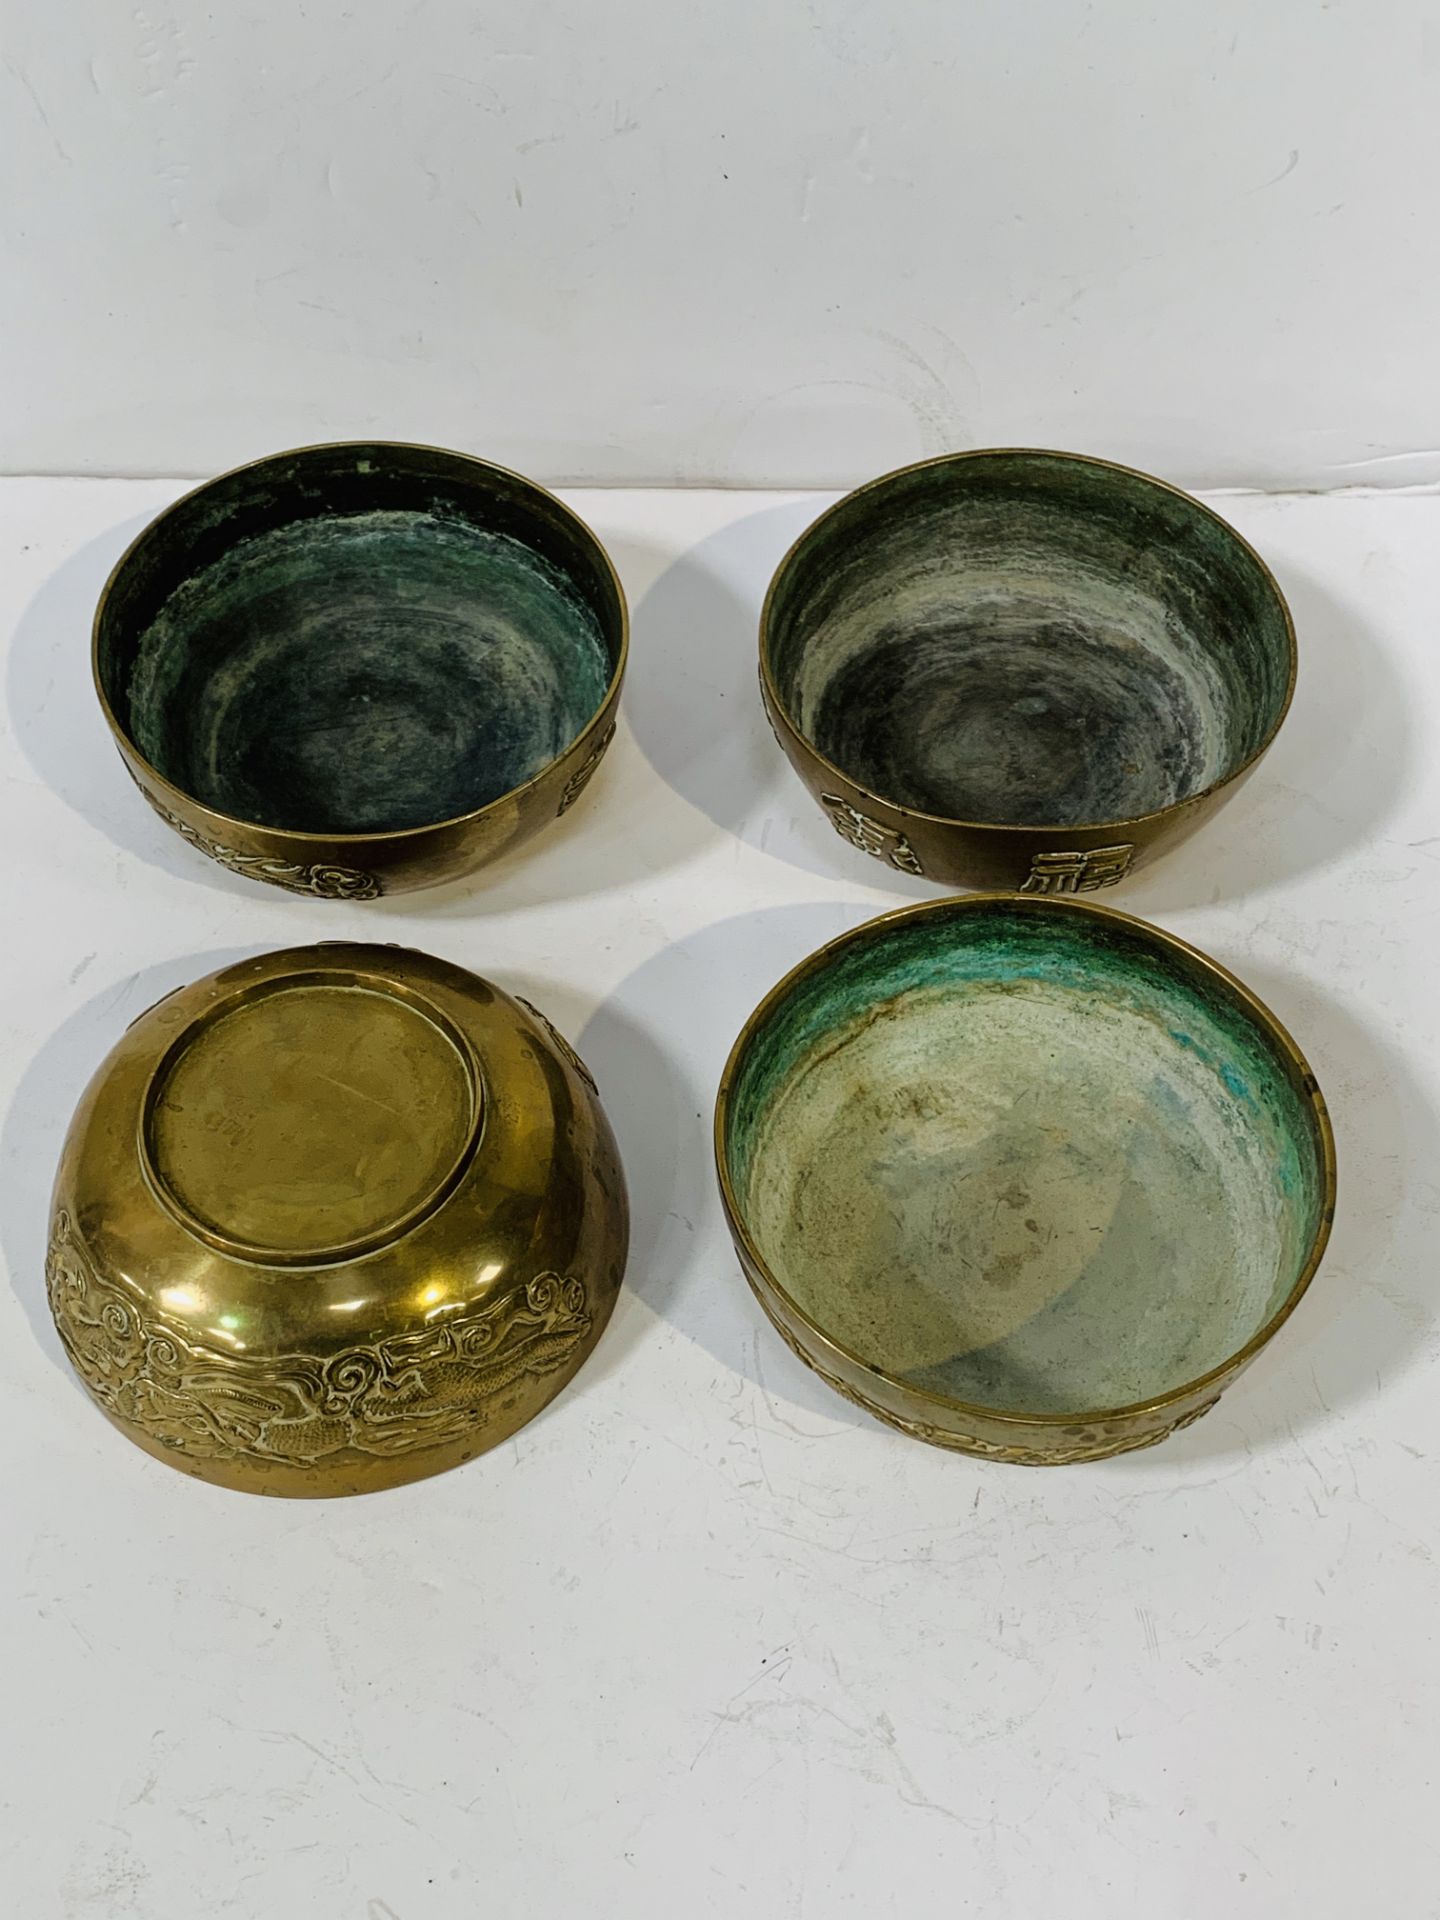 Set of 4 Chinese bronze 11.5cms bowls with Dragon design and character marks.